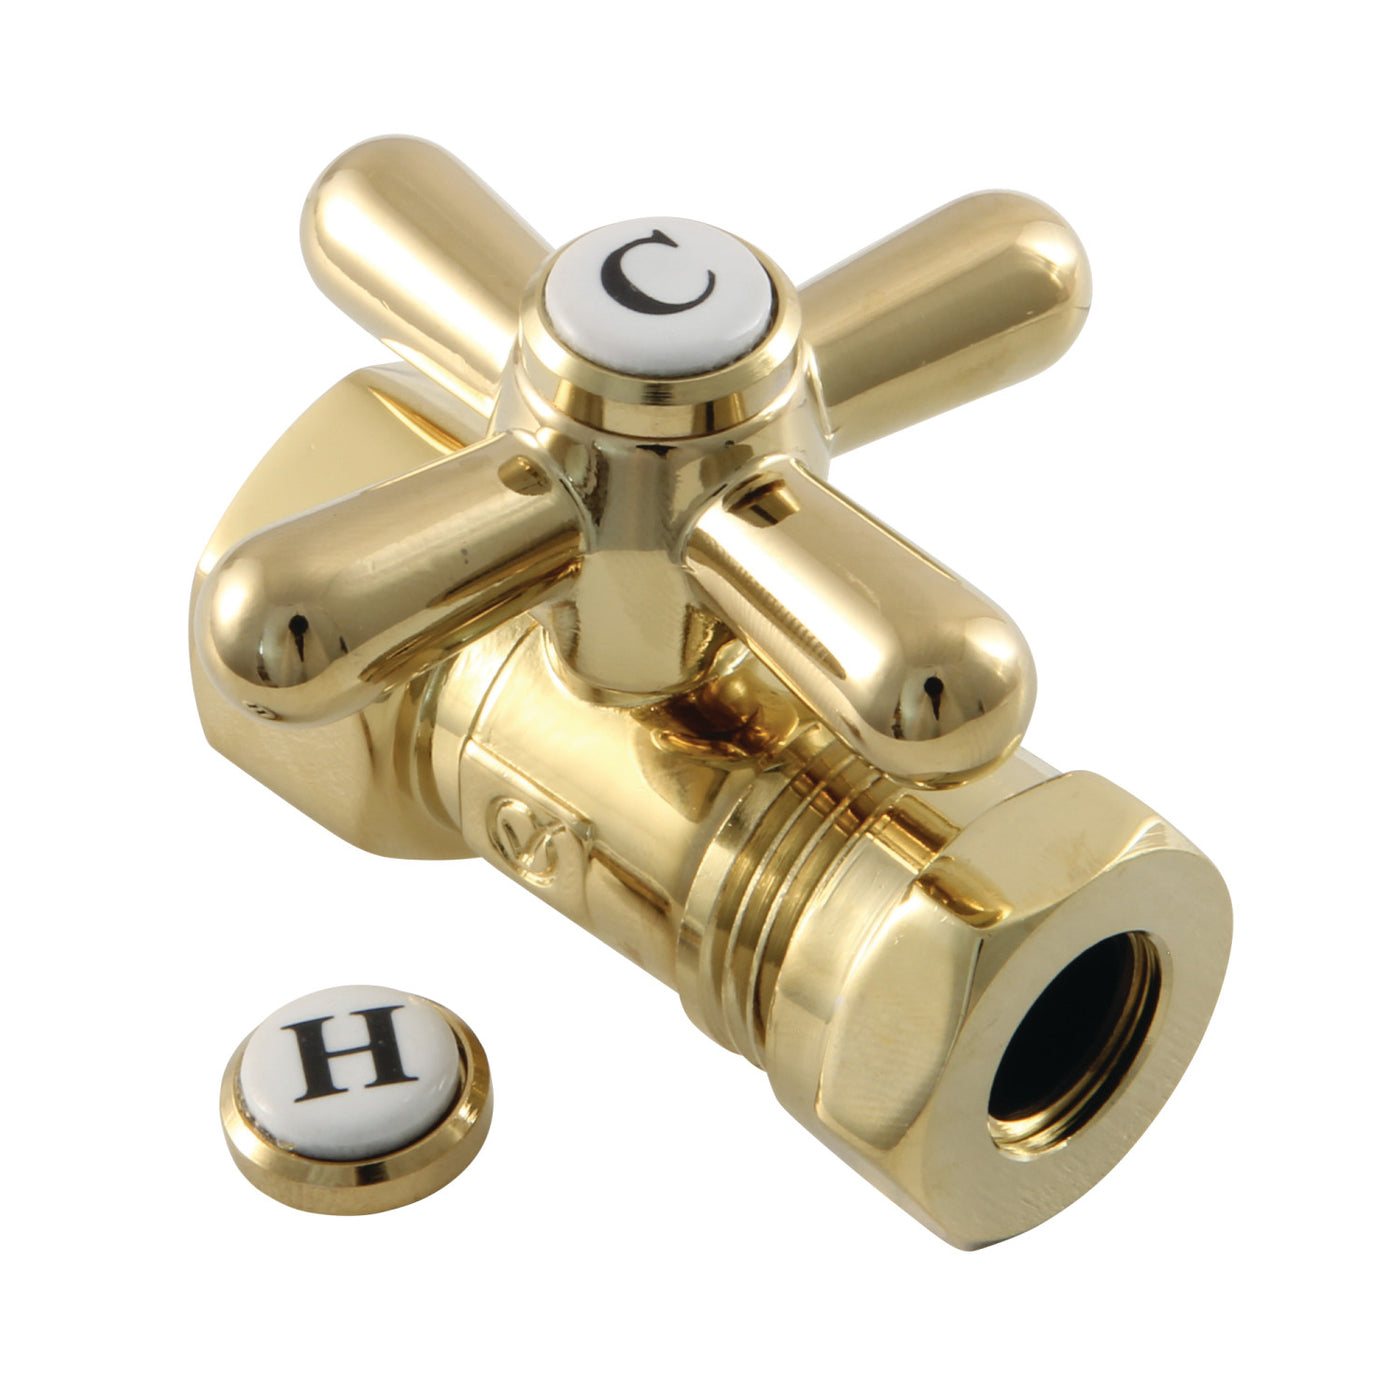 Elements of Design ECC44152X 1/2-Inch FIP x 1/2-Inch or 7/16-Inch Slip Joint Quarter-Turn Straight Stop Valve, Polished Brass